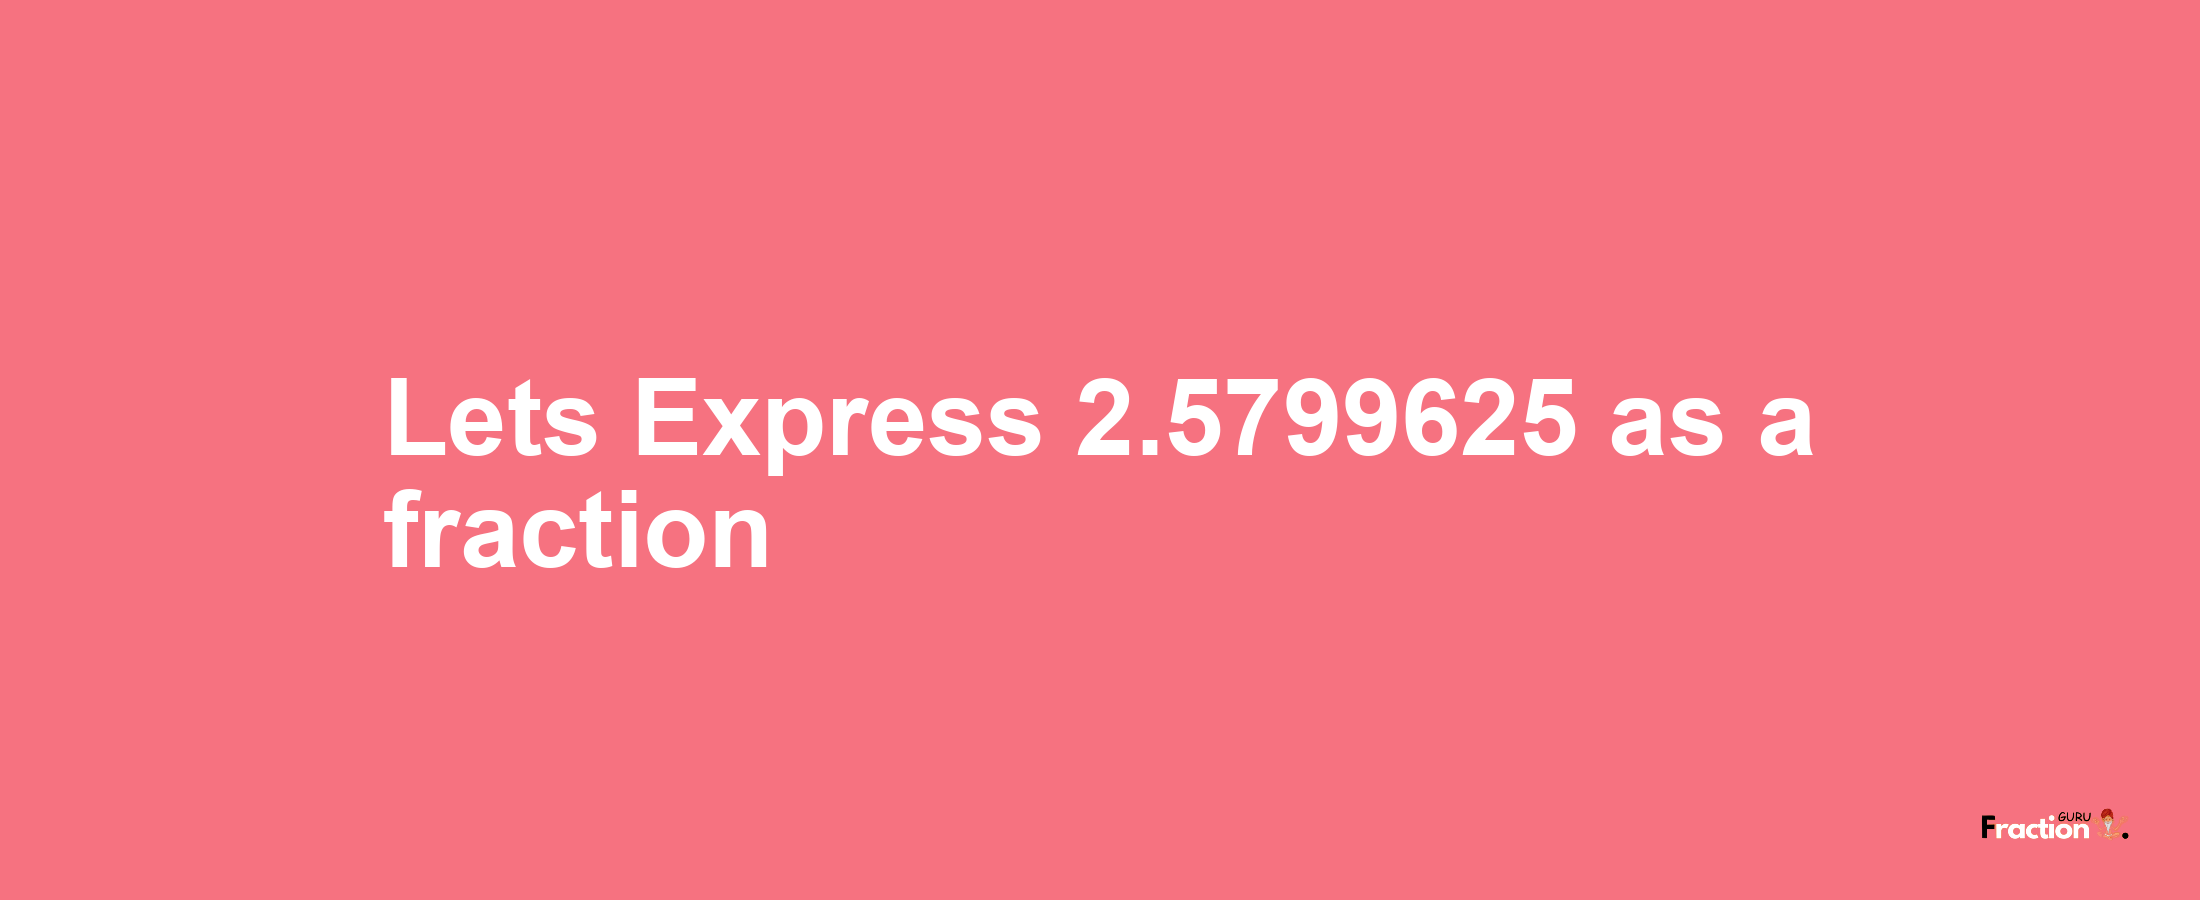 Lets Express 2.5799625 as afraction